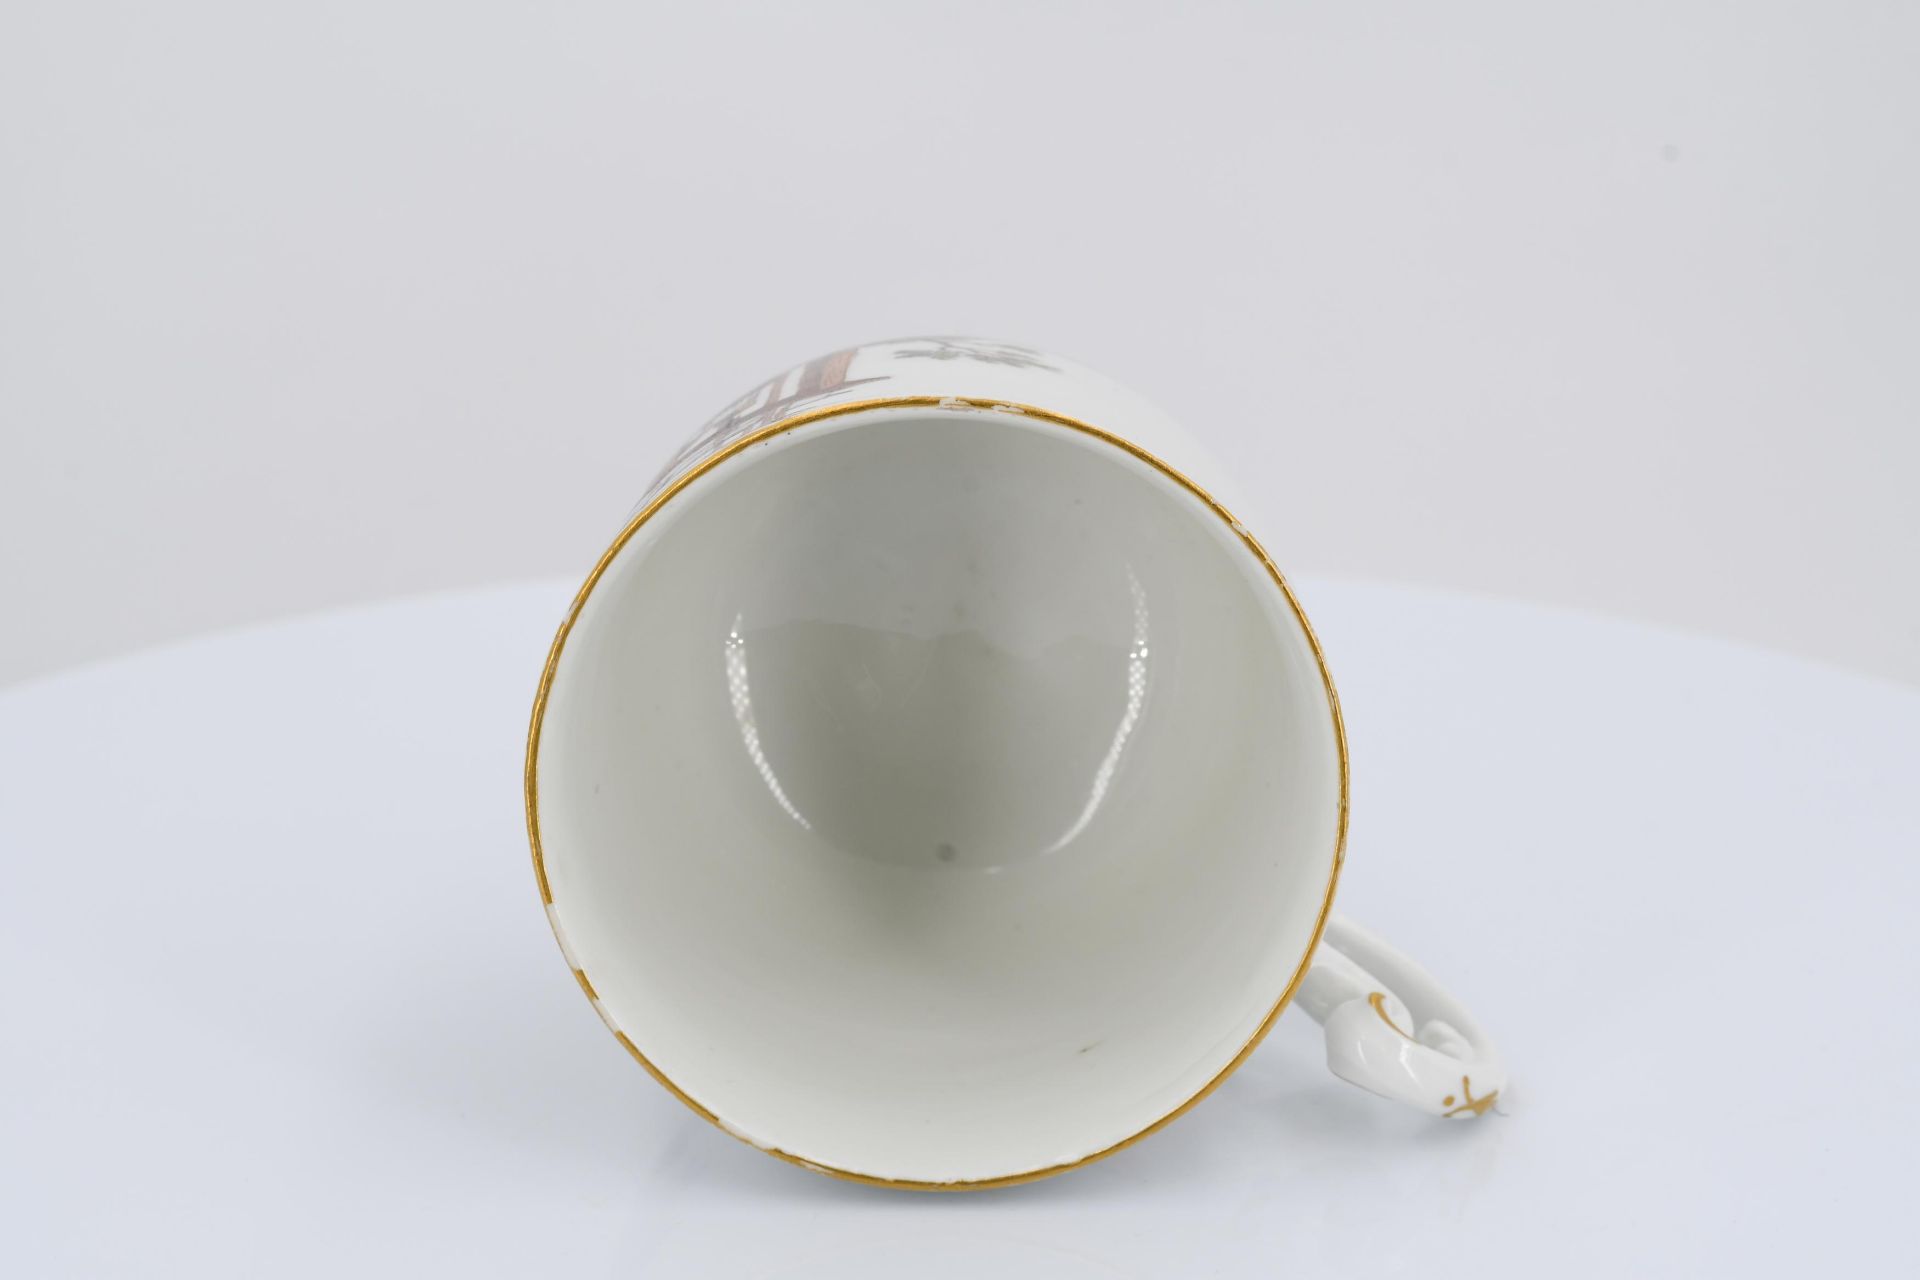 Porcelain cup and saucer with occupation depictions - Image 8 of 9